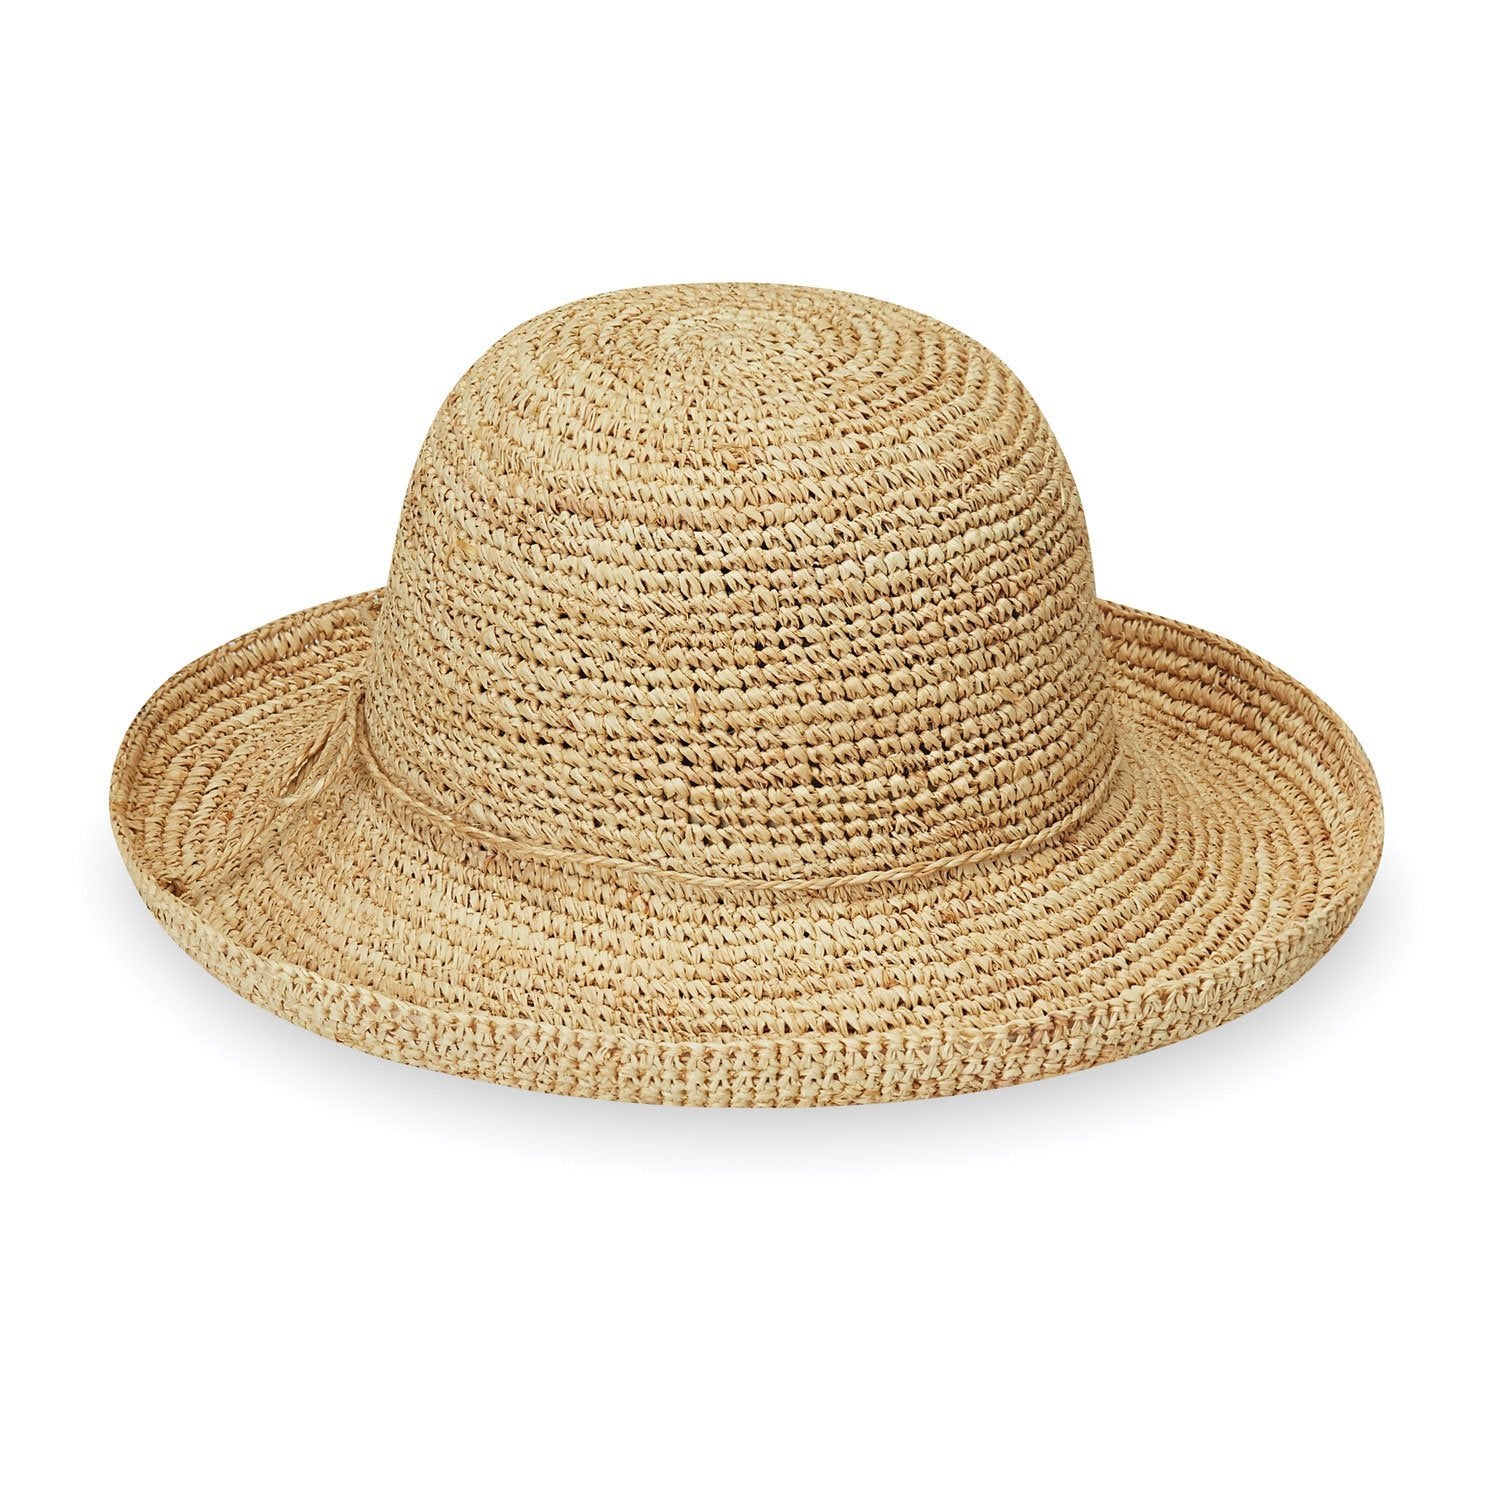 Featuring Front of Women's Wide Brim Crown Style Petite Catalina Raffia Sun Hat in Natural from Wallaroo